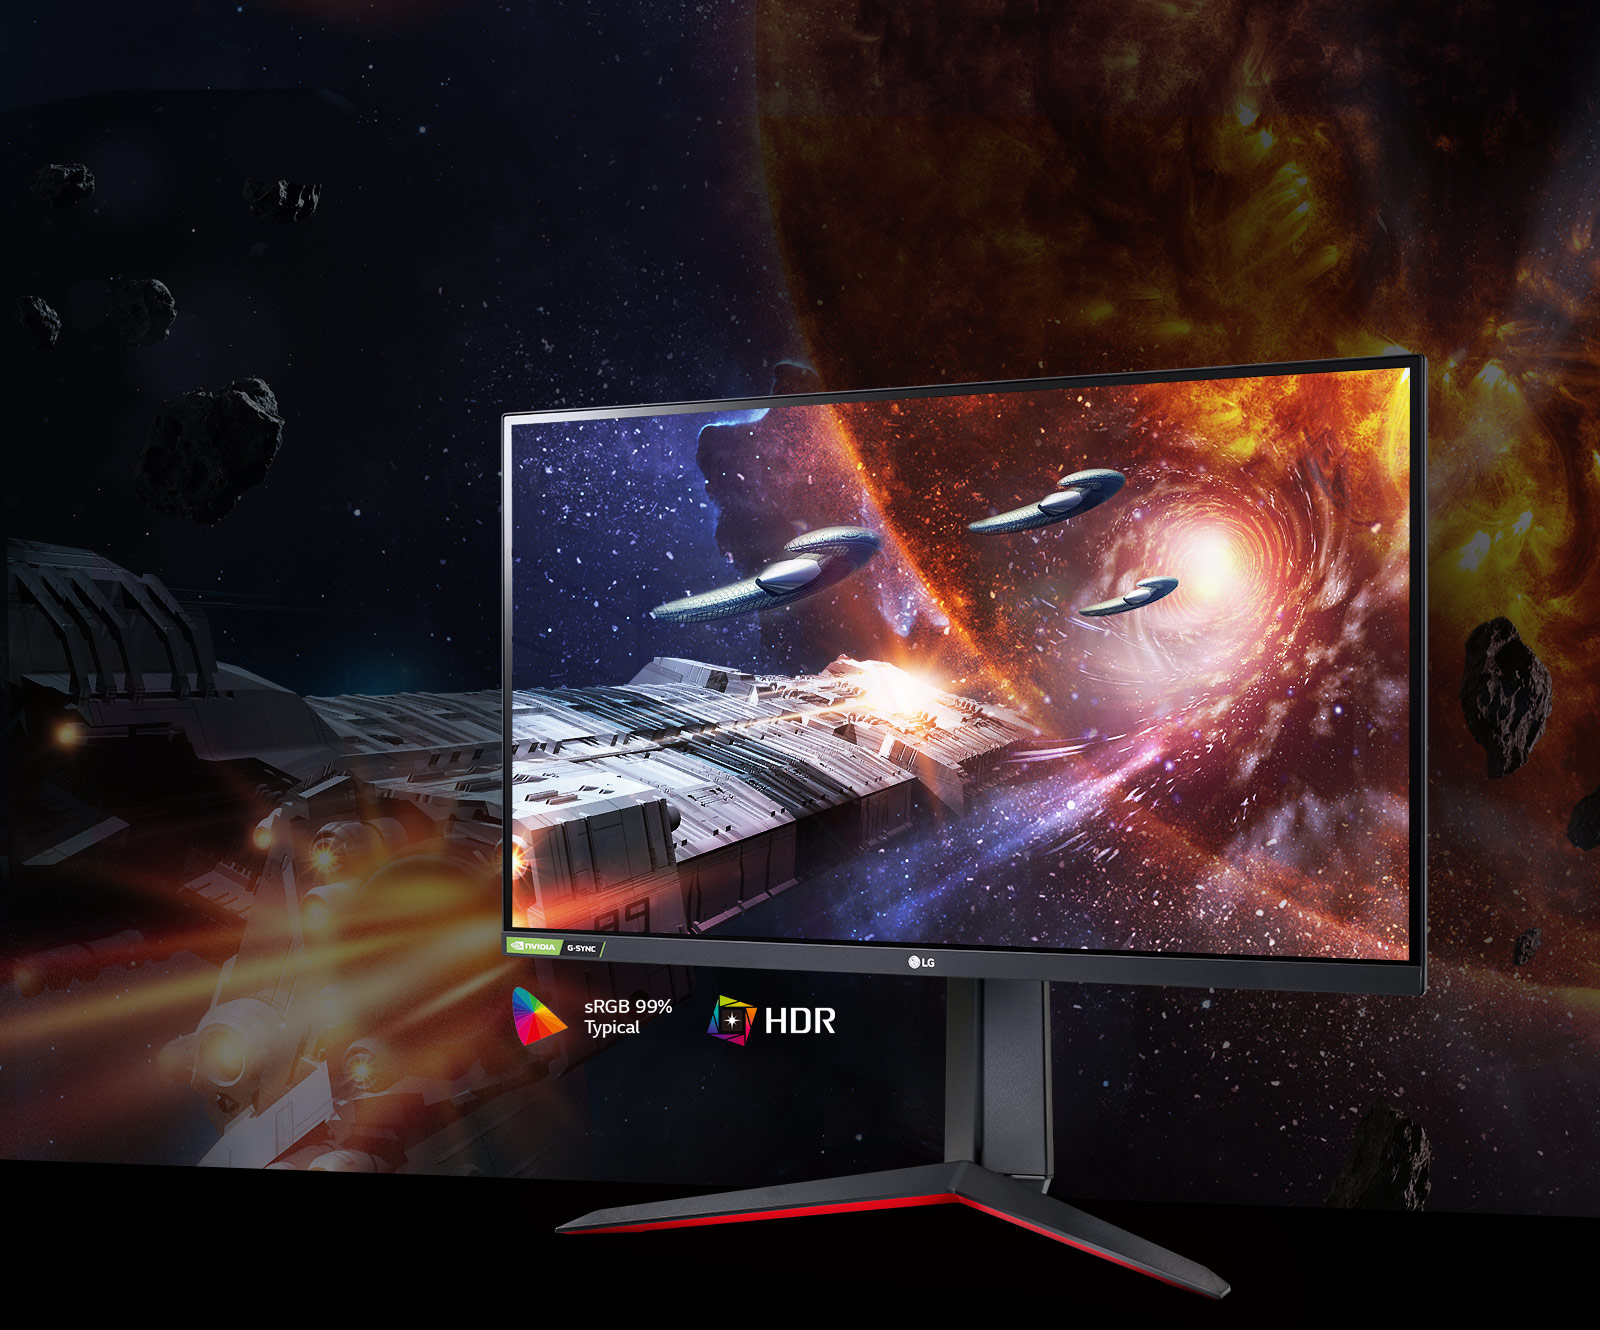 The Gaming Scene in Rich Colors and Contrast on The Monitor Supporting Hdr10 With Srgb 99% (Typ.) 